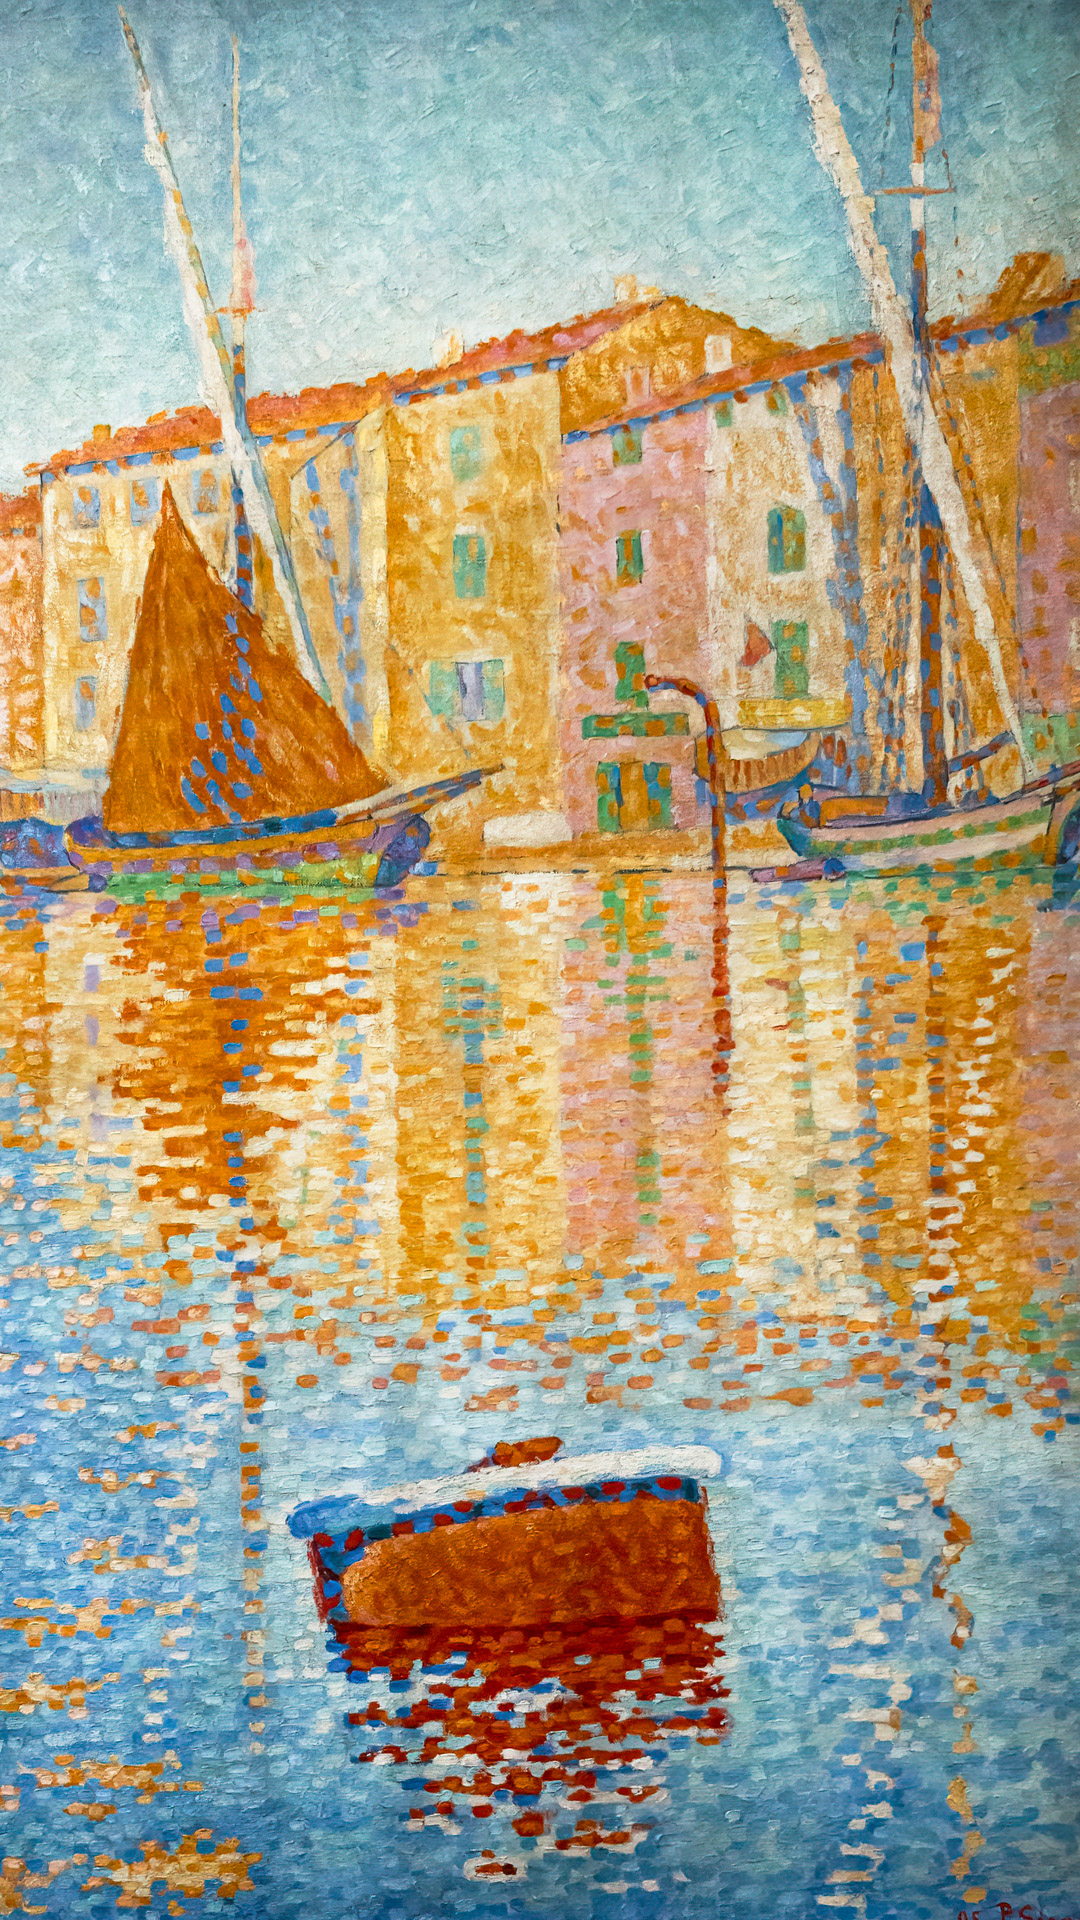 Carry the beauty of impressionism with you through Paul Signac's mesmerizing mobile wallpaper.